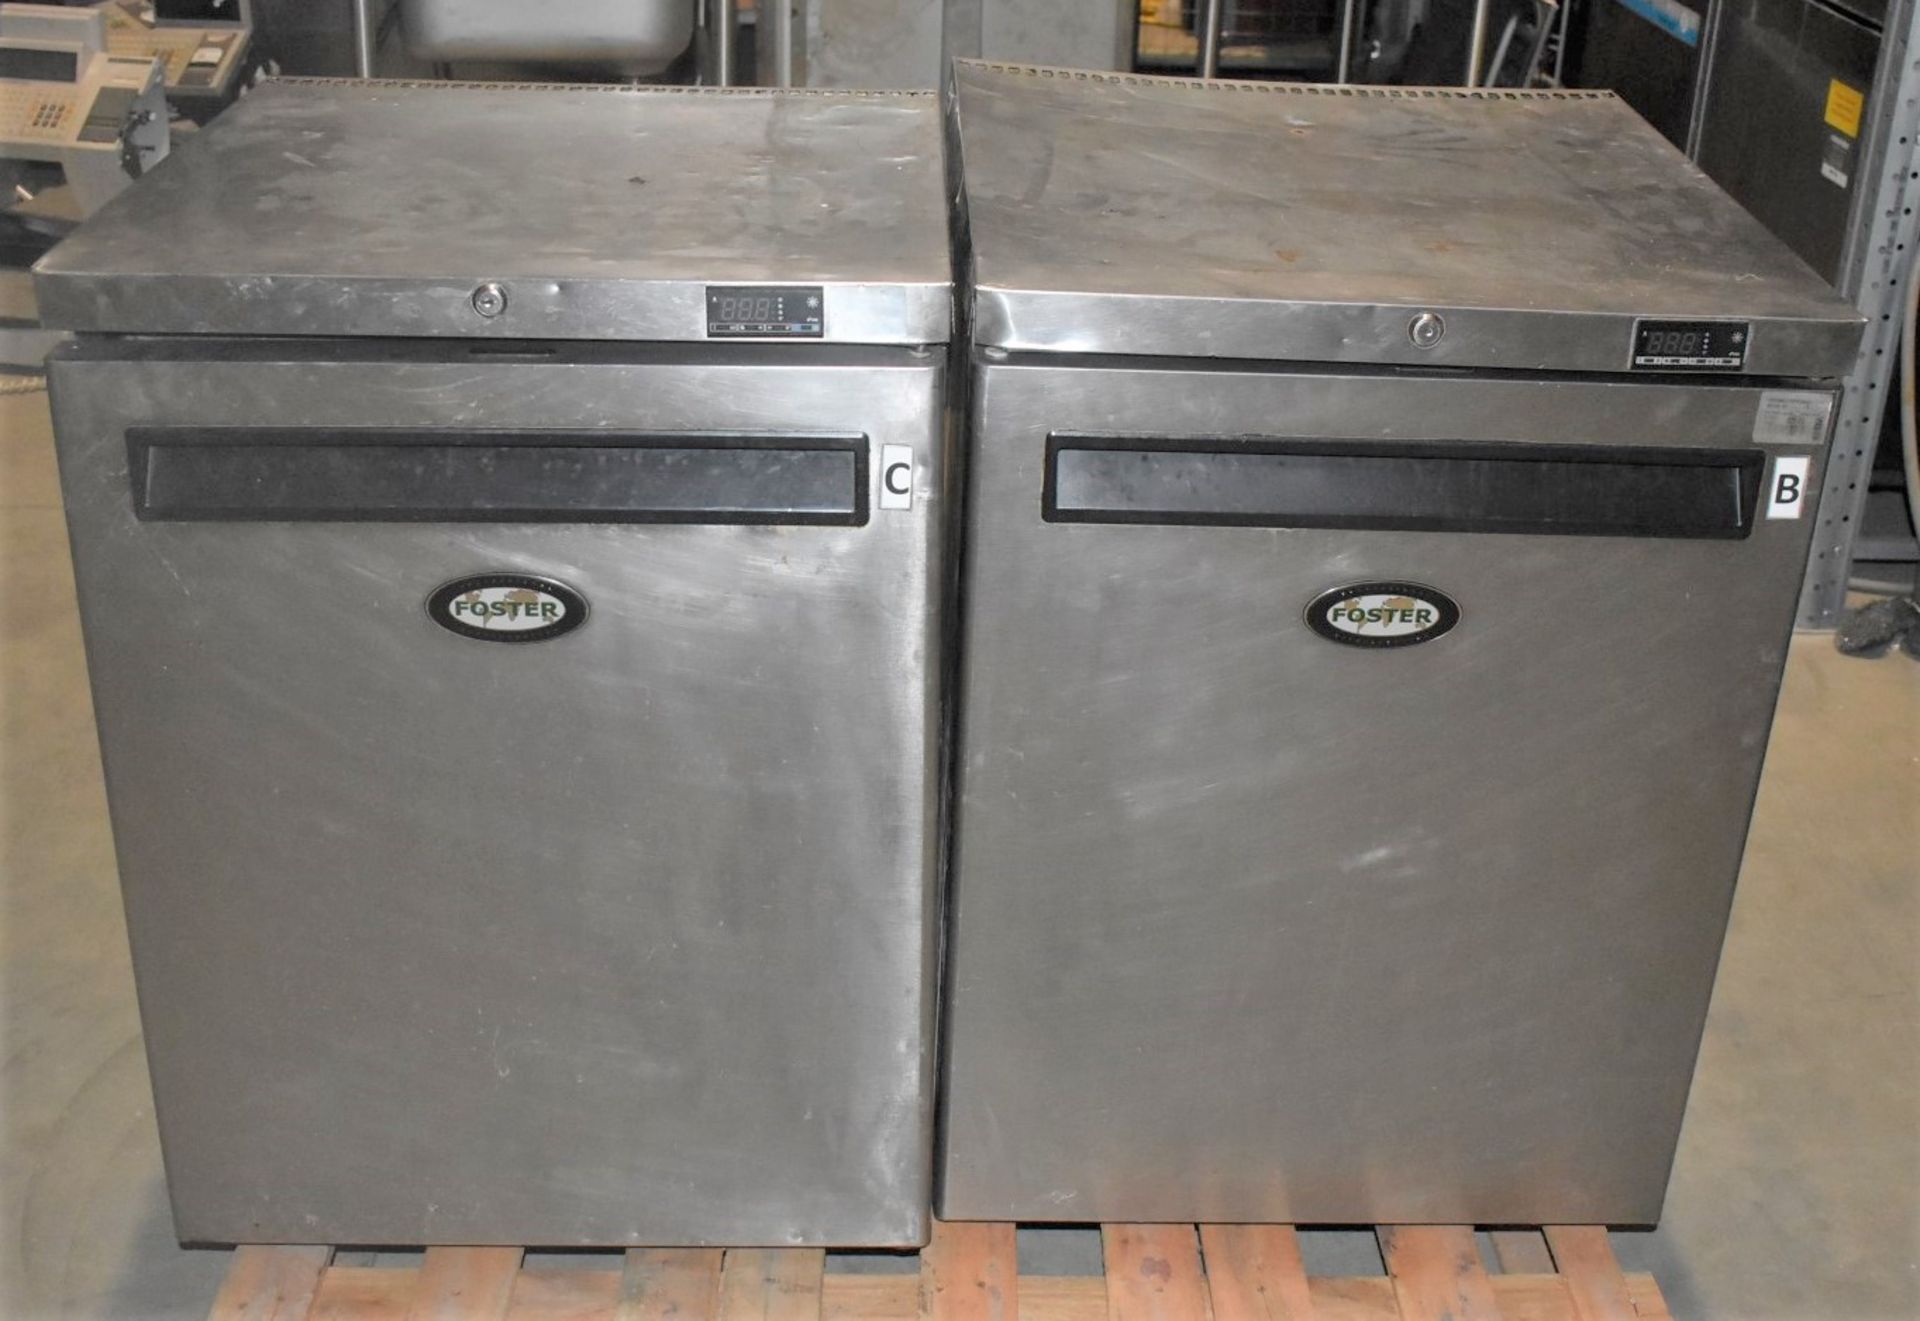 2 x Fosters Undercounter 60cm Freezers With Stainless Steel Exteriors